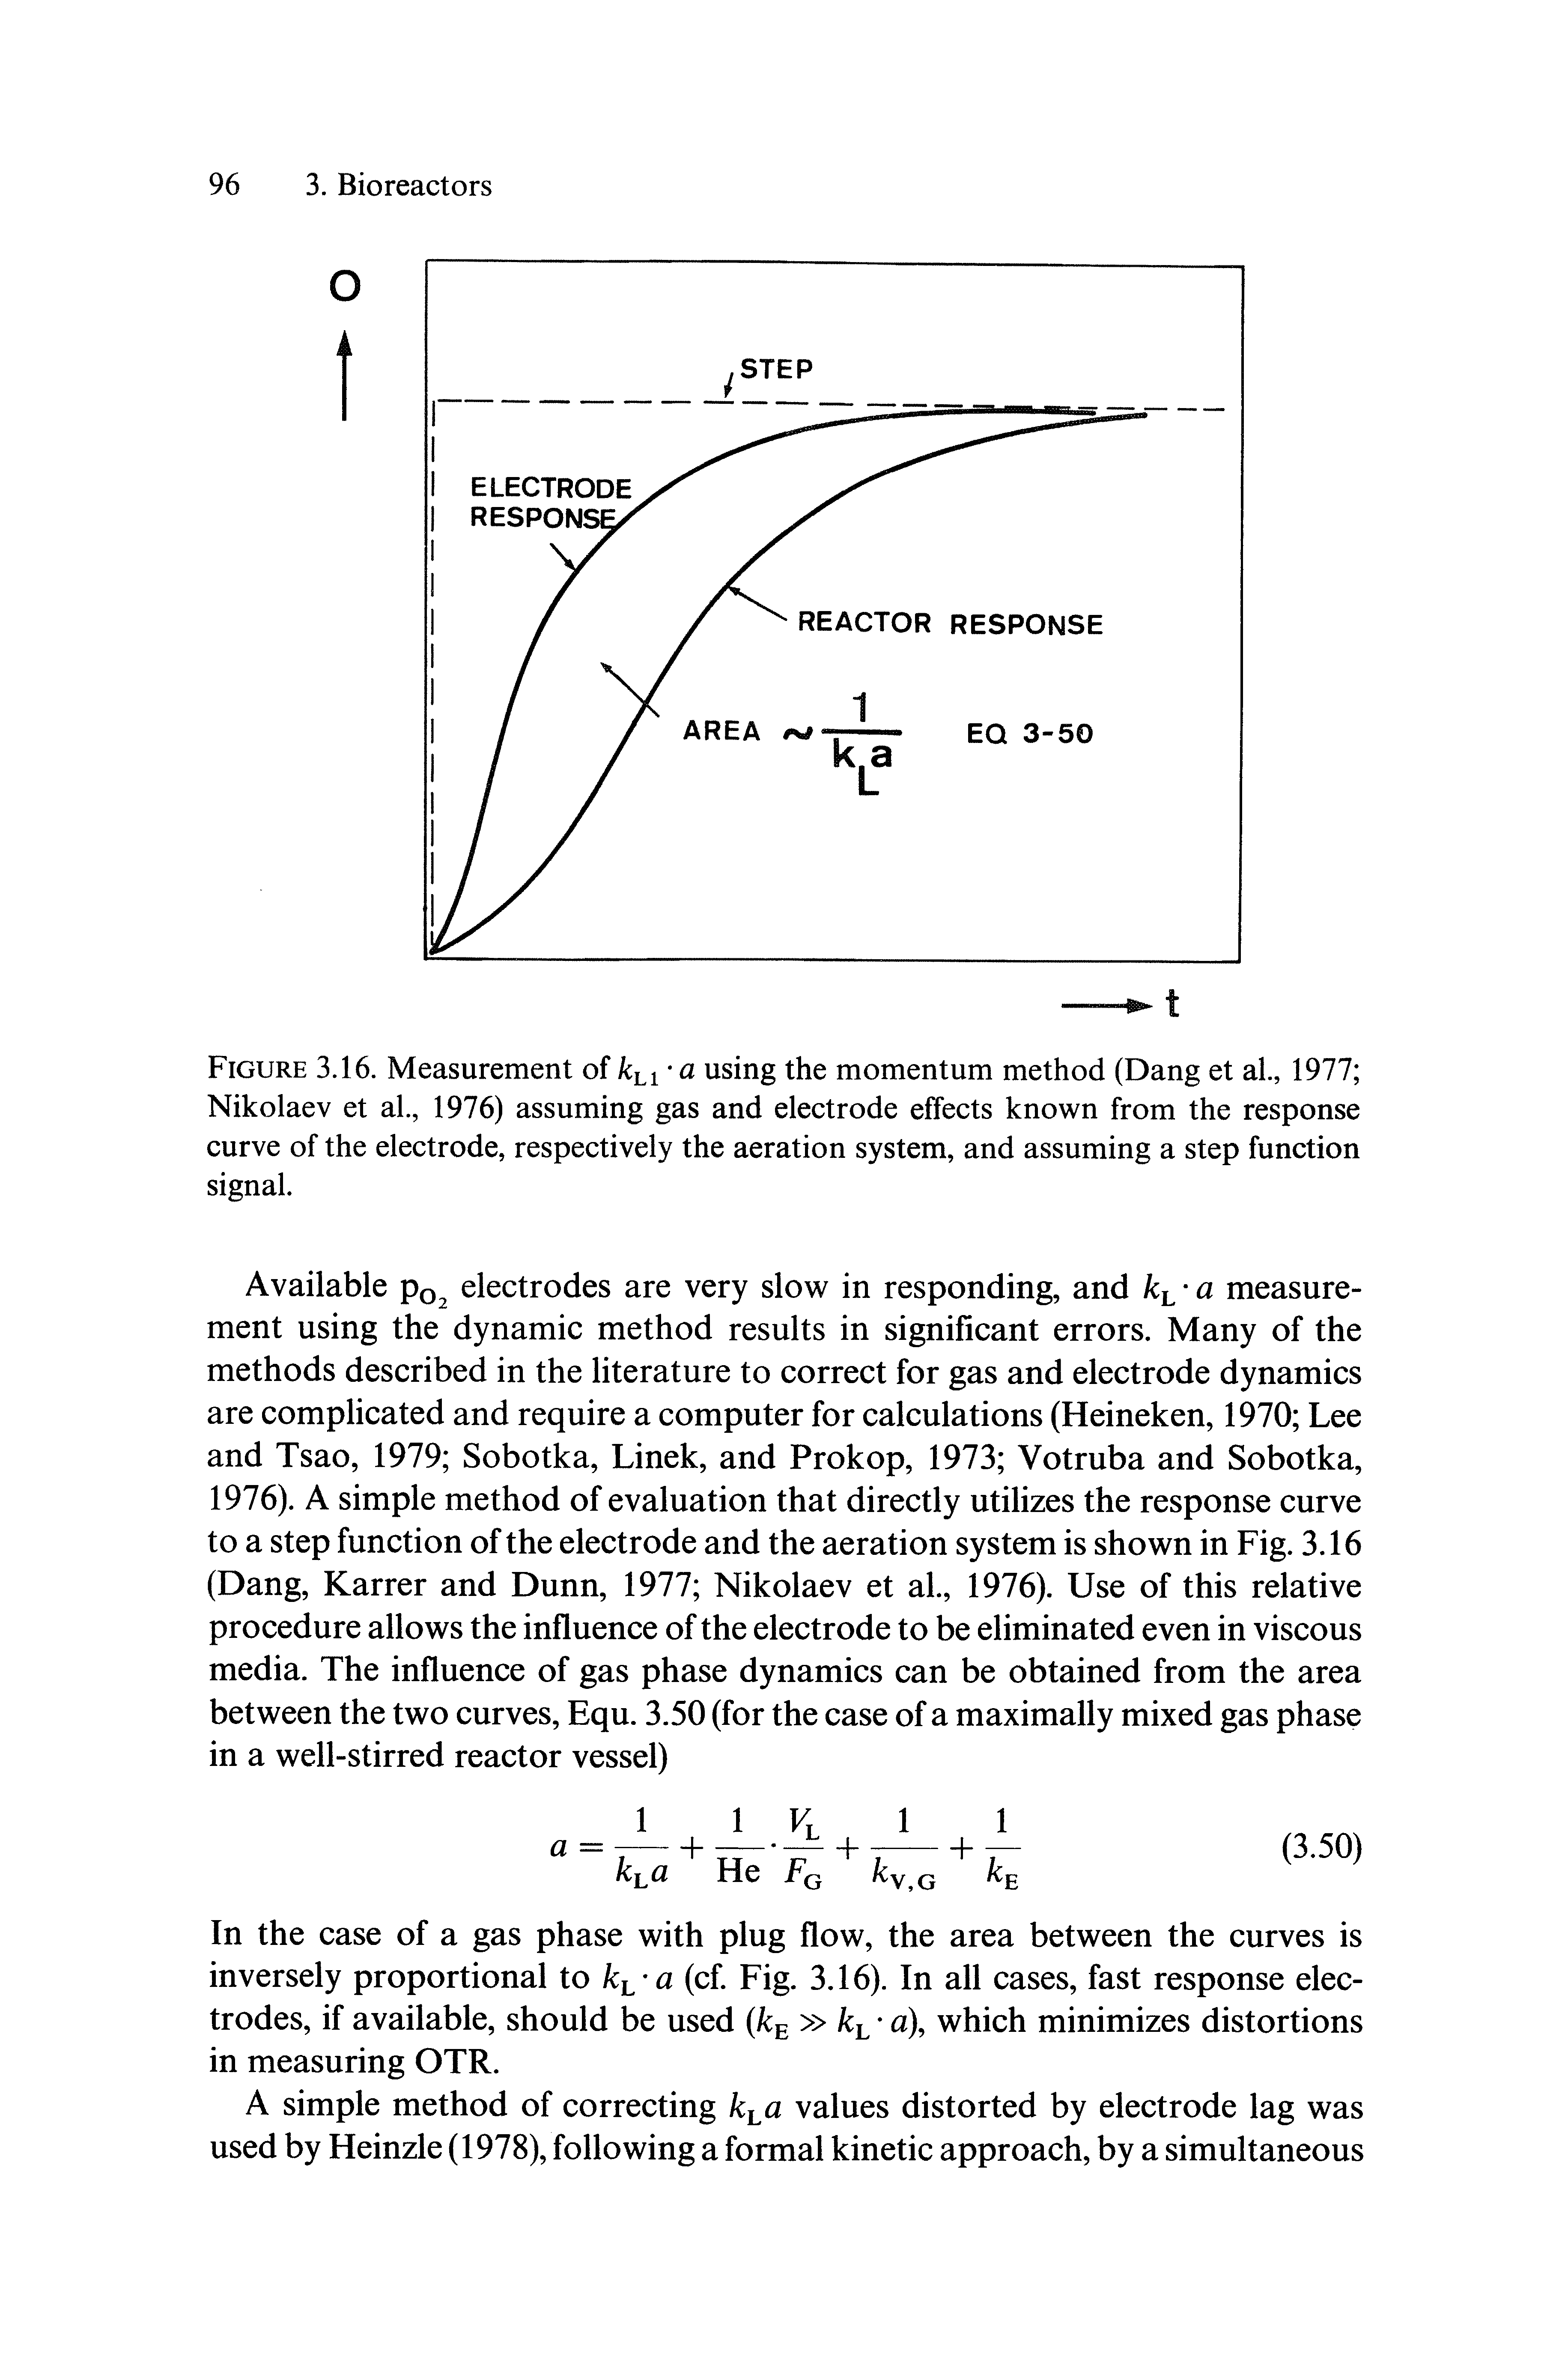 Figure 3.16. Measurement of /cli a using the momentum method (Dang et al., 1977 Nikolaev et al., 1976) assuming gas and electrode effects known from the response curve of the electrode, respectively the aeration system, and assuming a step function signal.